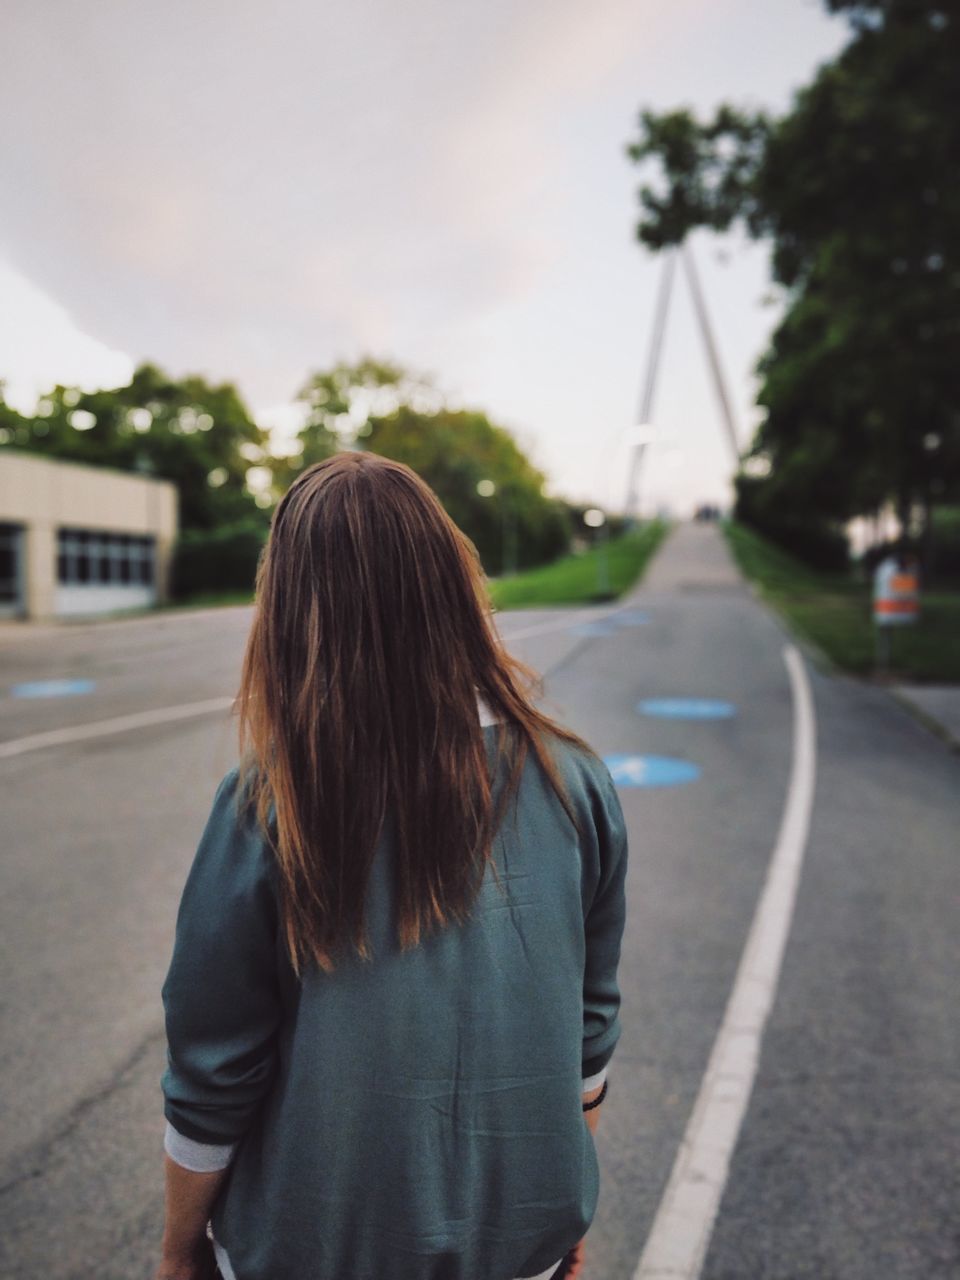 one person, rear view, hairstyle, long hair, road, city, transportation, casual clothing, spring, brown hair, architecture, women, focus on foreground, street, adult, day, standing, blue, waist up, young adult, nature, clothing, sky, tree, lifestyles, fashion, outdoors, person, built structure, child, three quarter length, leisure activity, dress